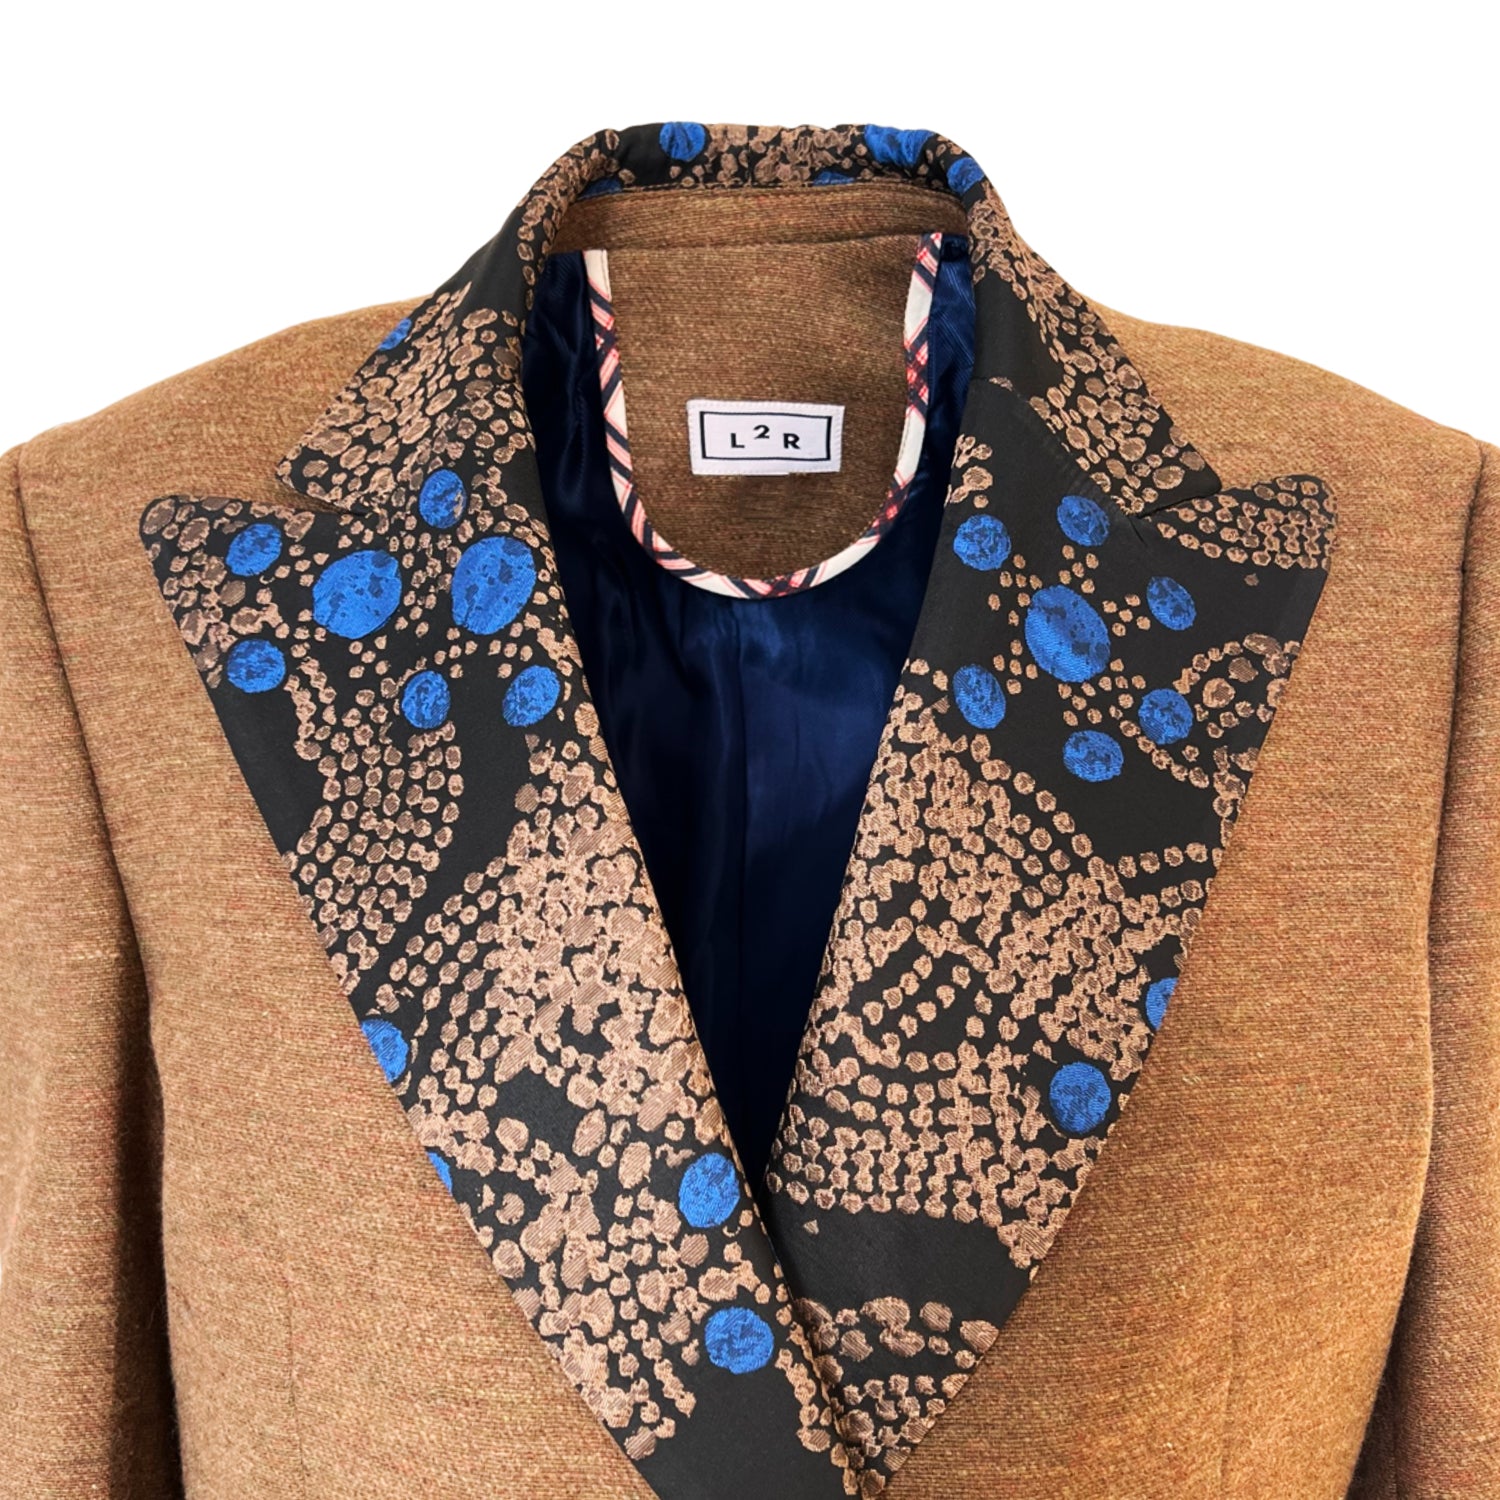 Wool Double Breasted Blazer in Camel Hair and Blue